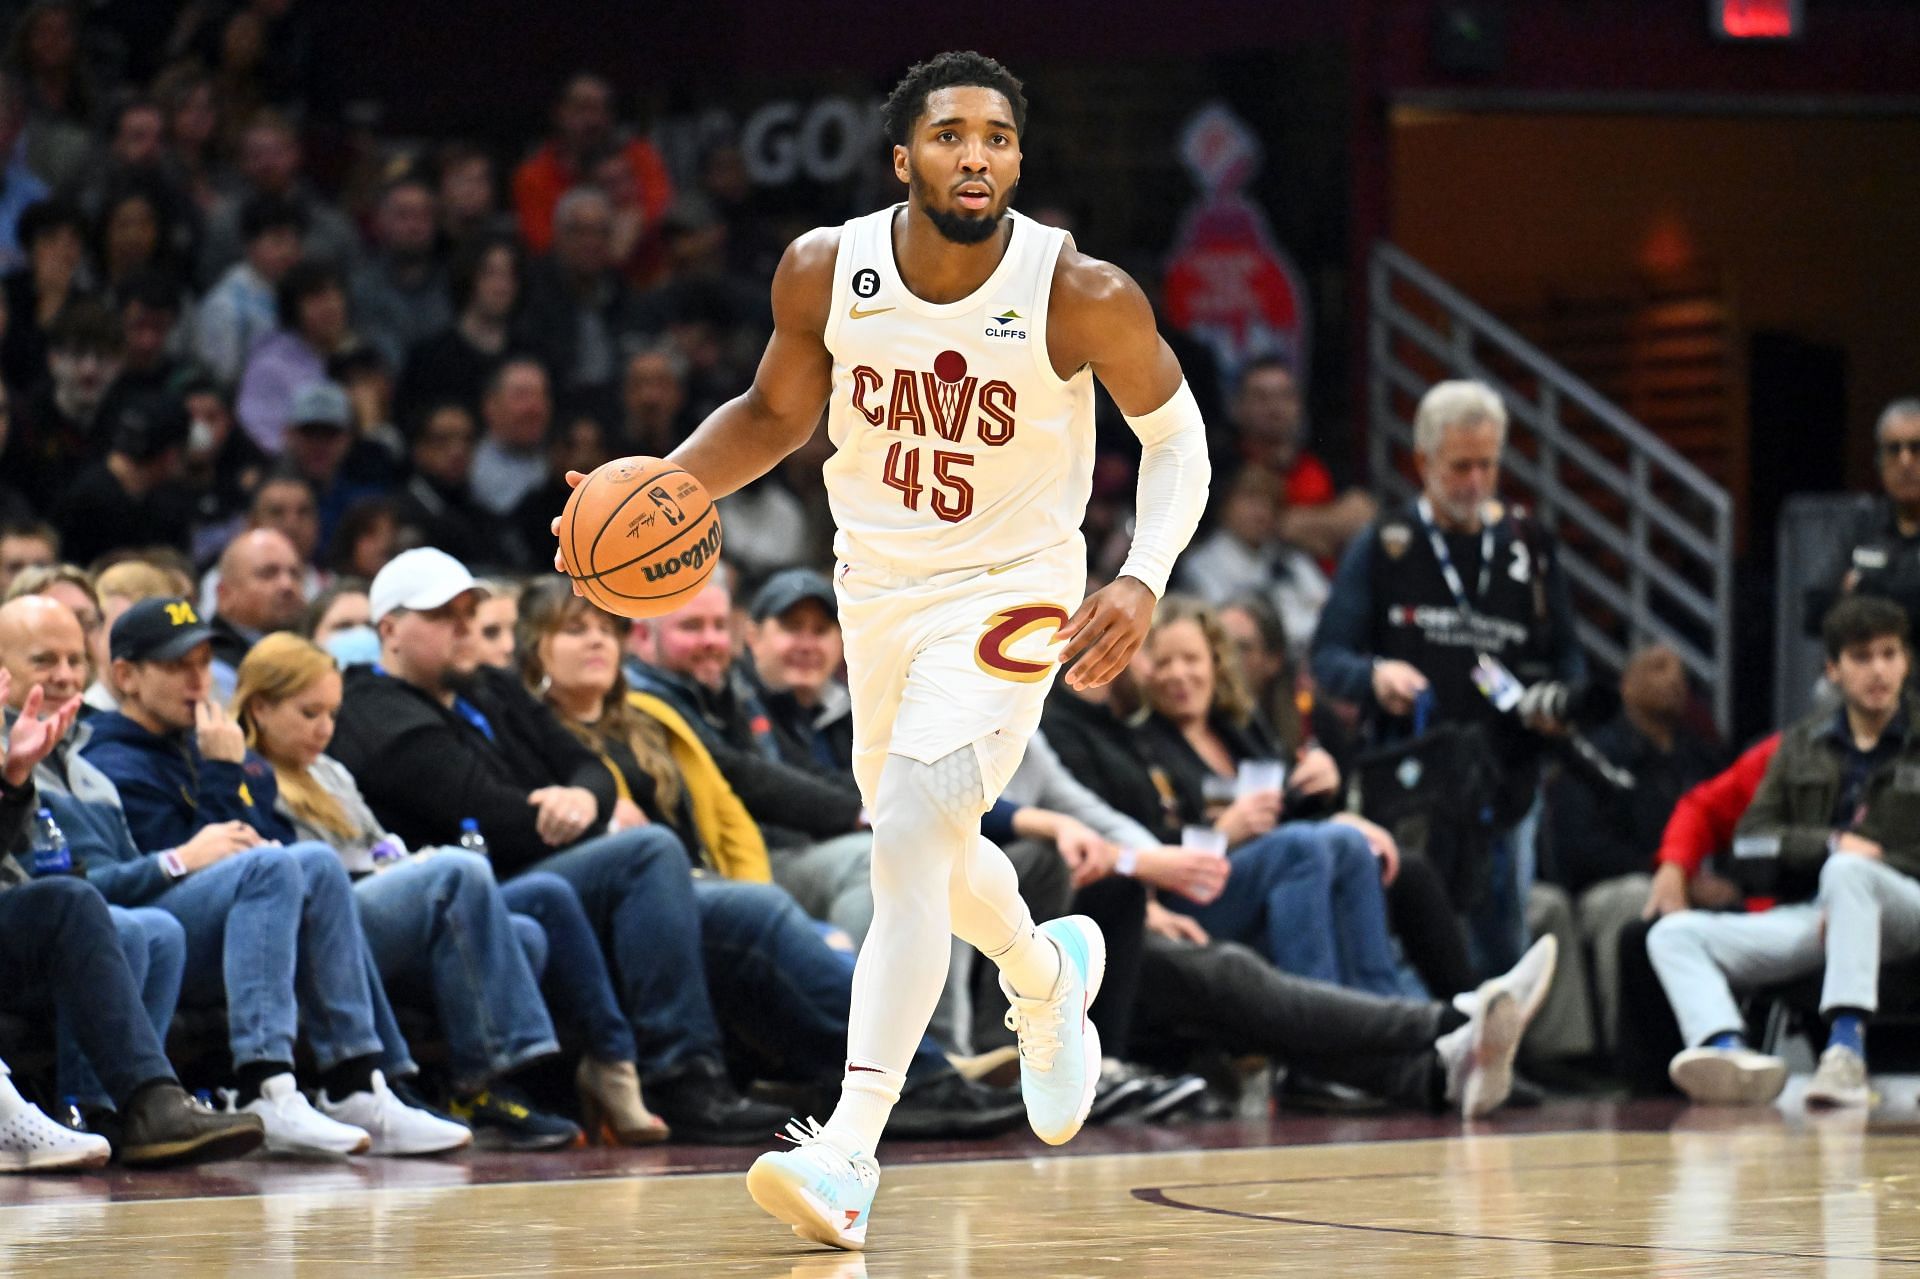 Cleveland Cavaliers All-Star shooting guard Donovan Mitchell has enjoyed a spectacular season